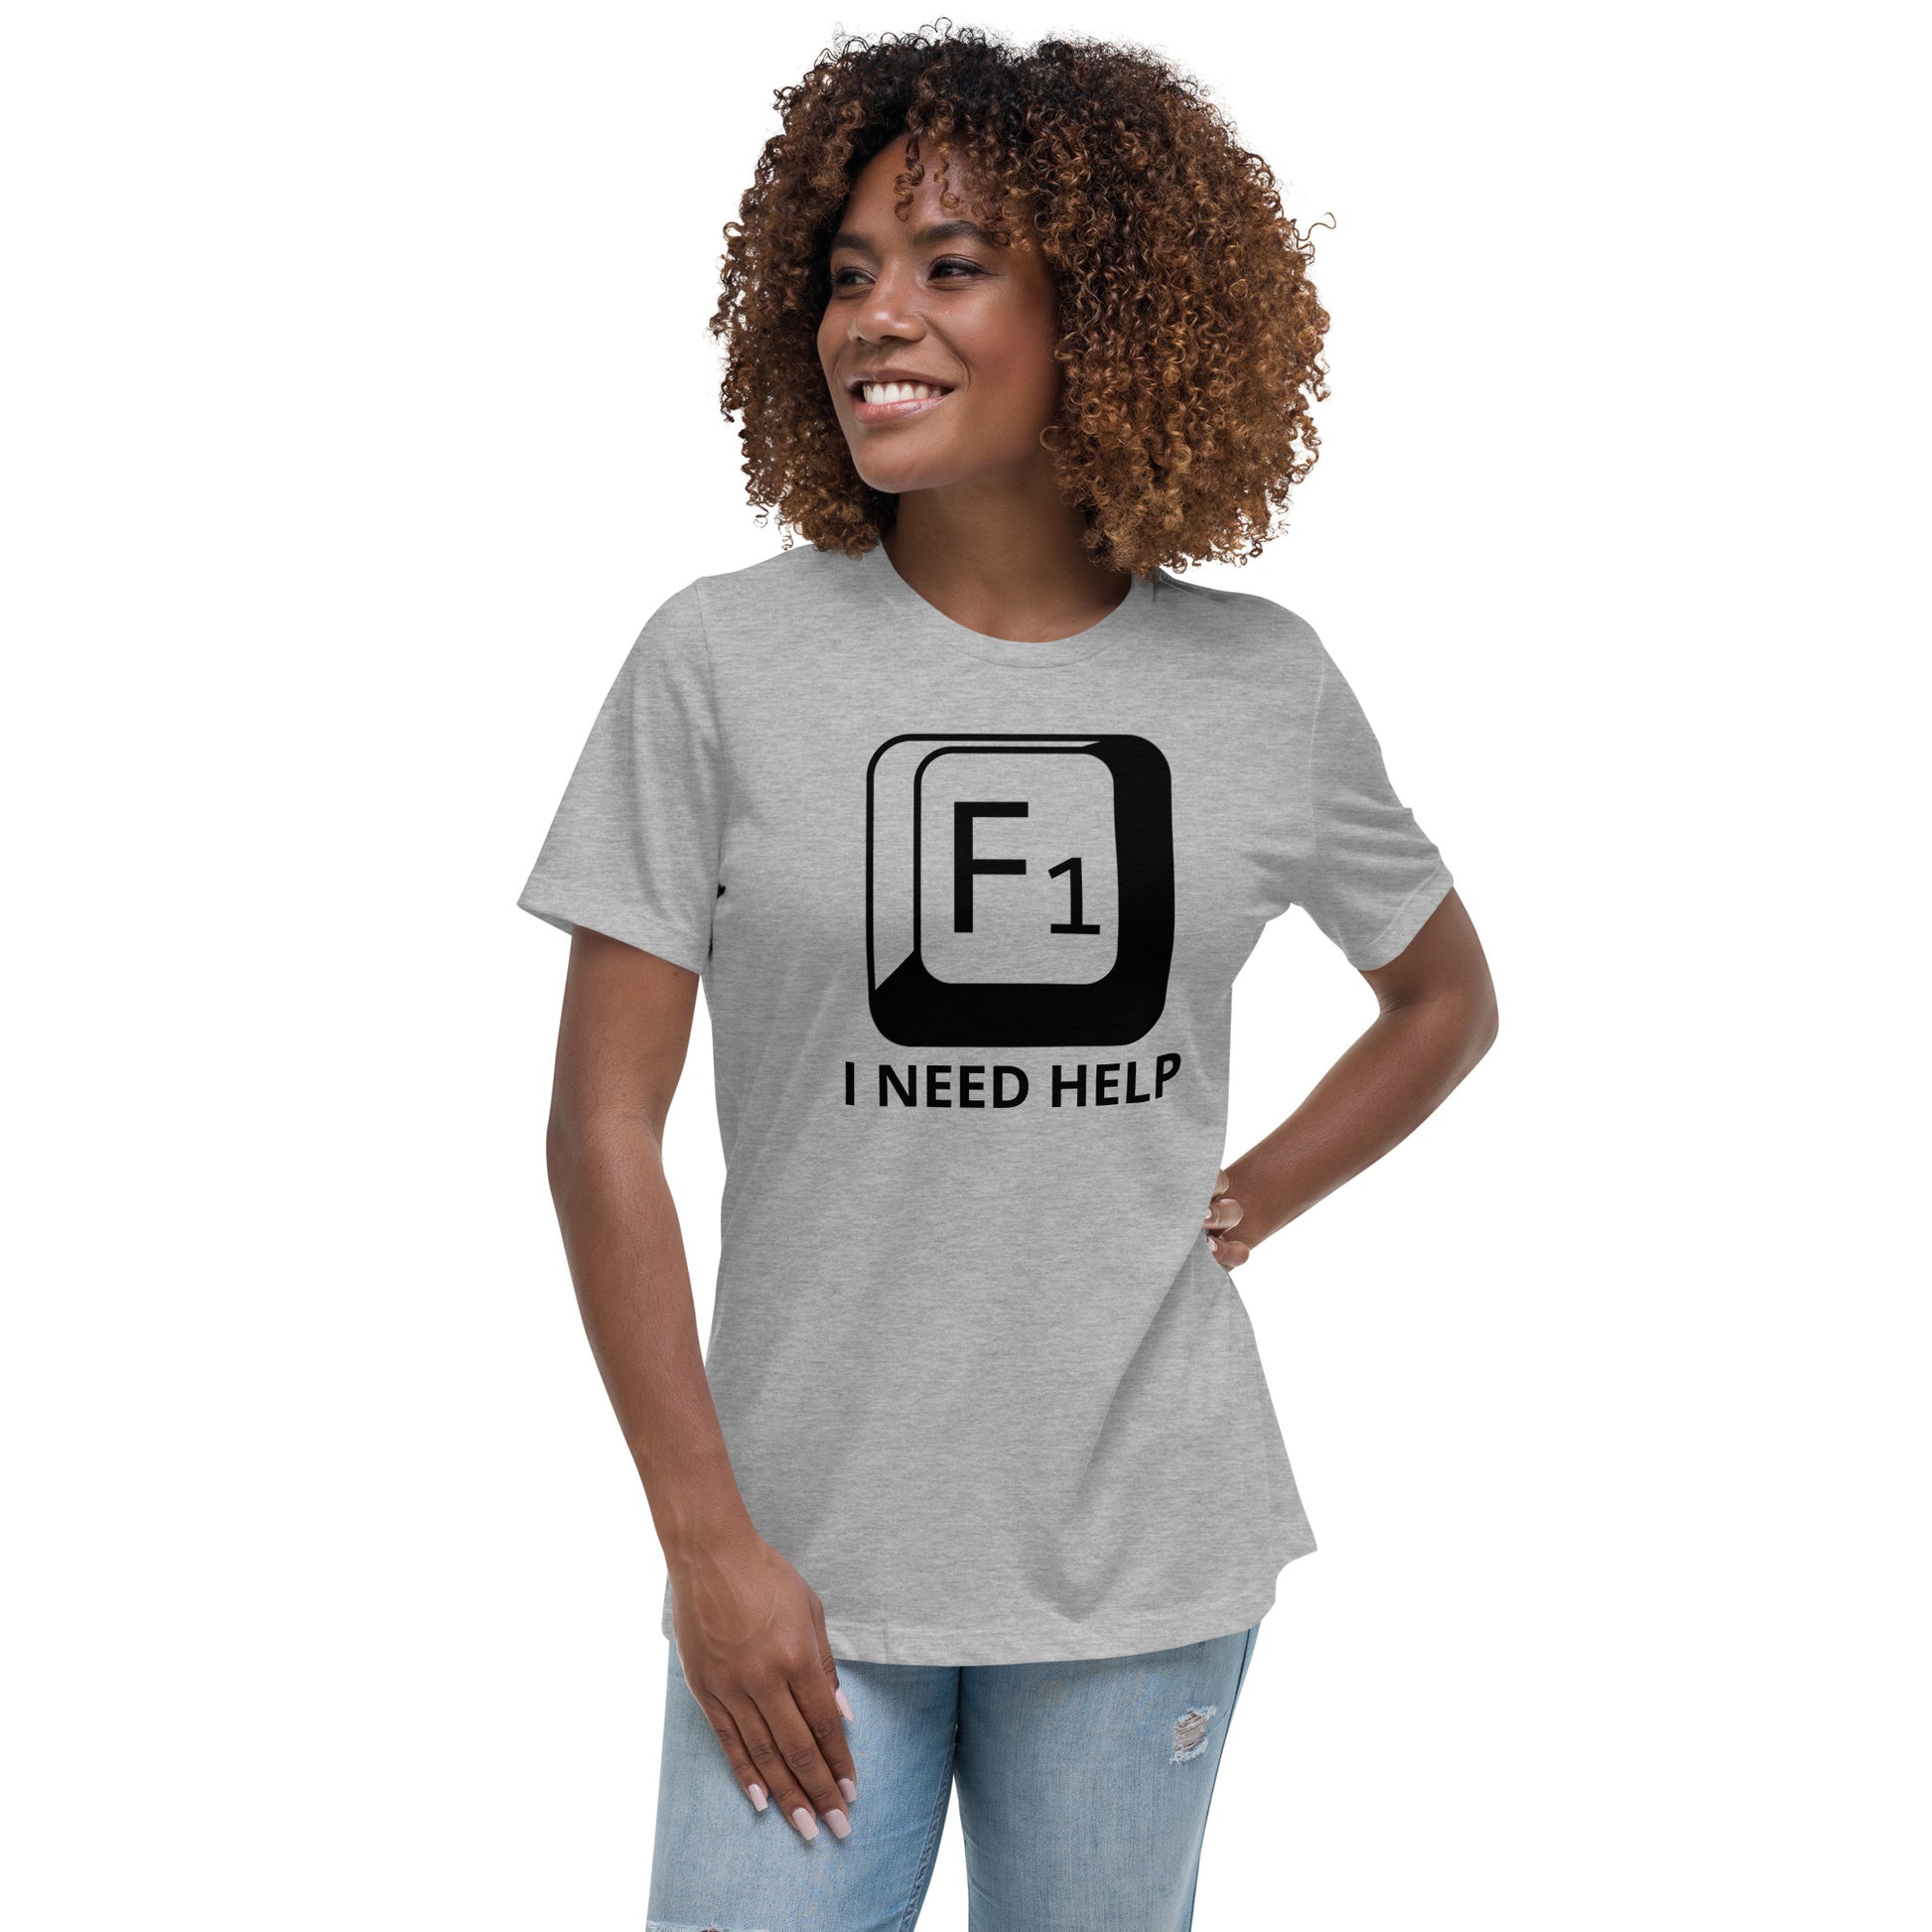 Woman with grey t-shirt with picture of "F1" key and text "I need help"